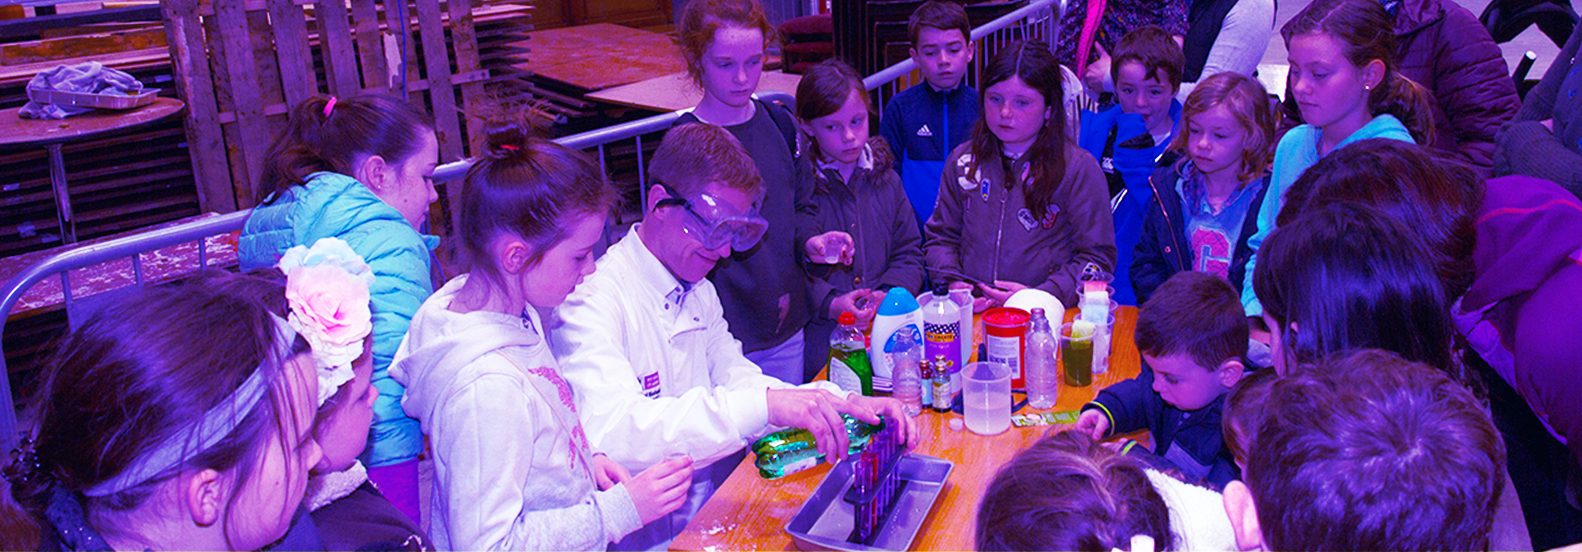 Scientist demonstrates experiments at a science fair